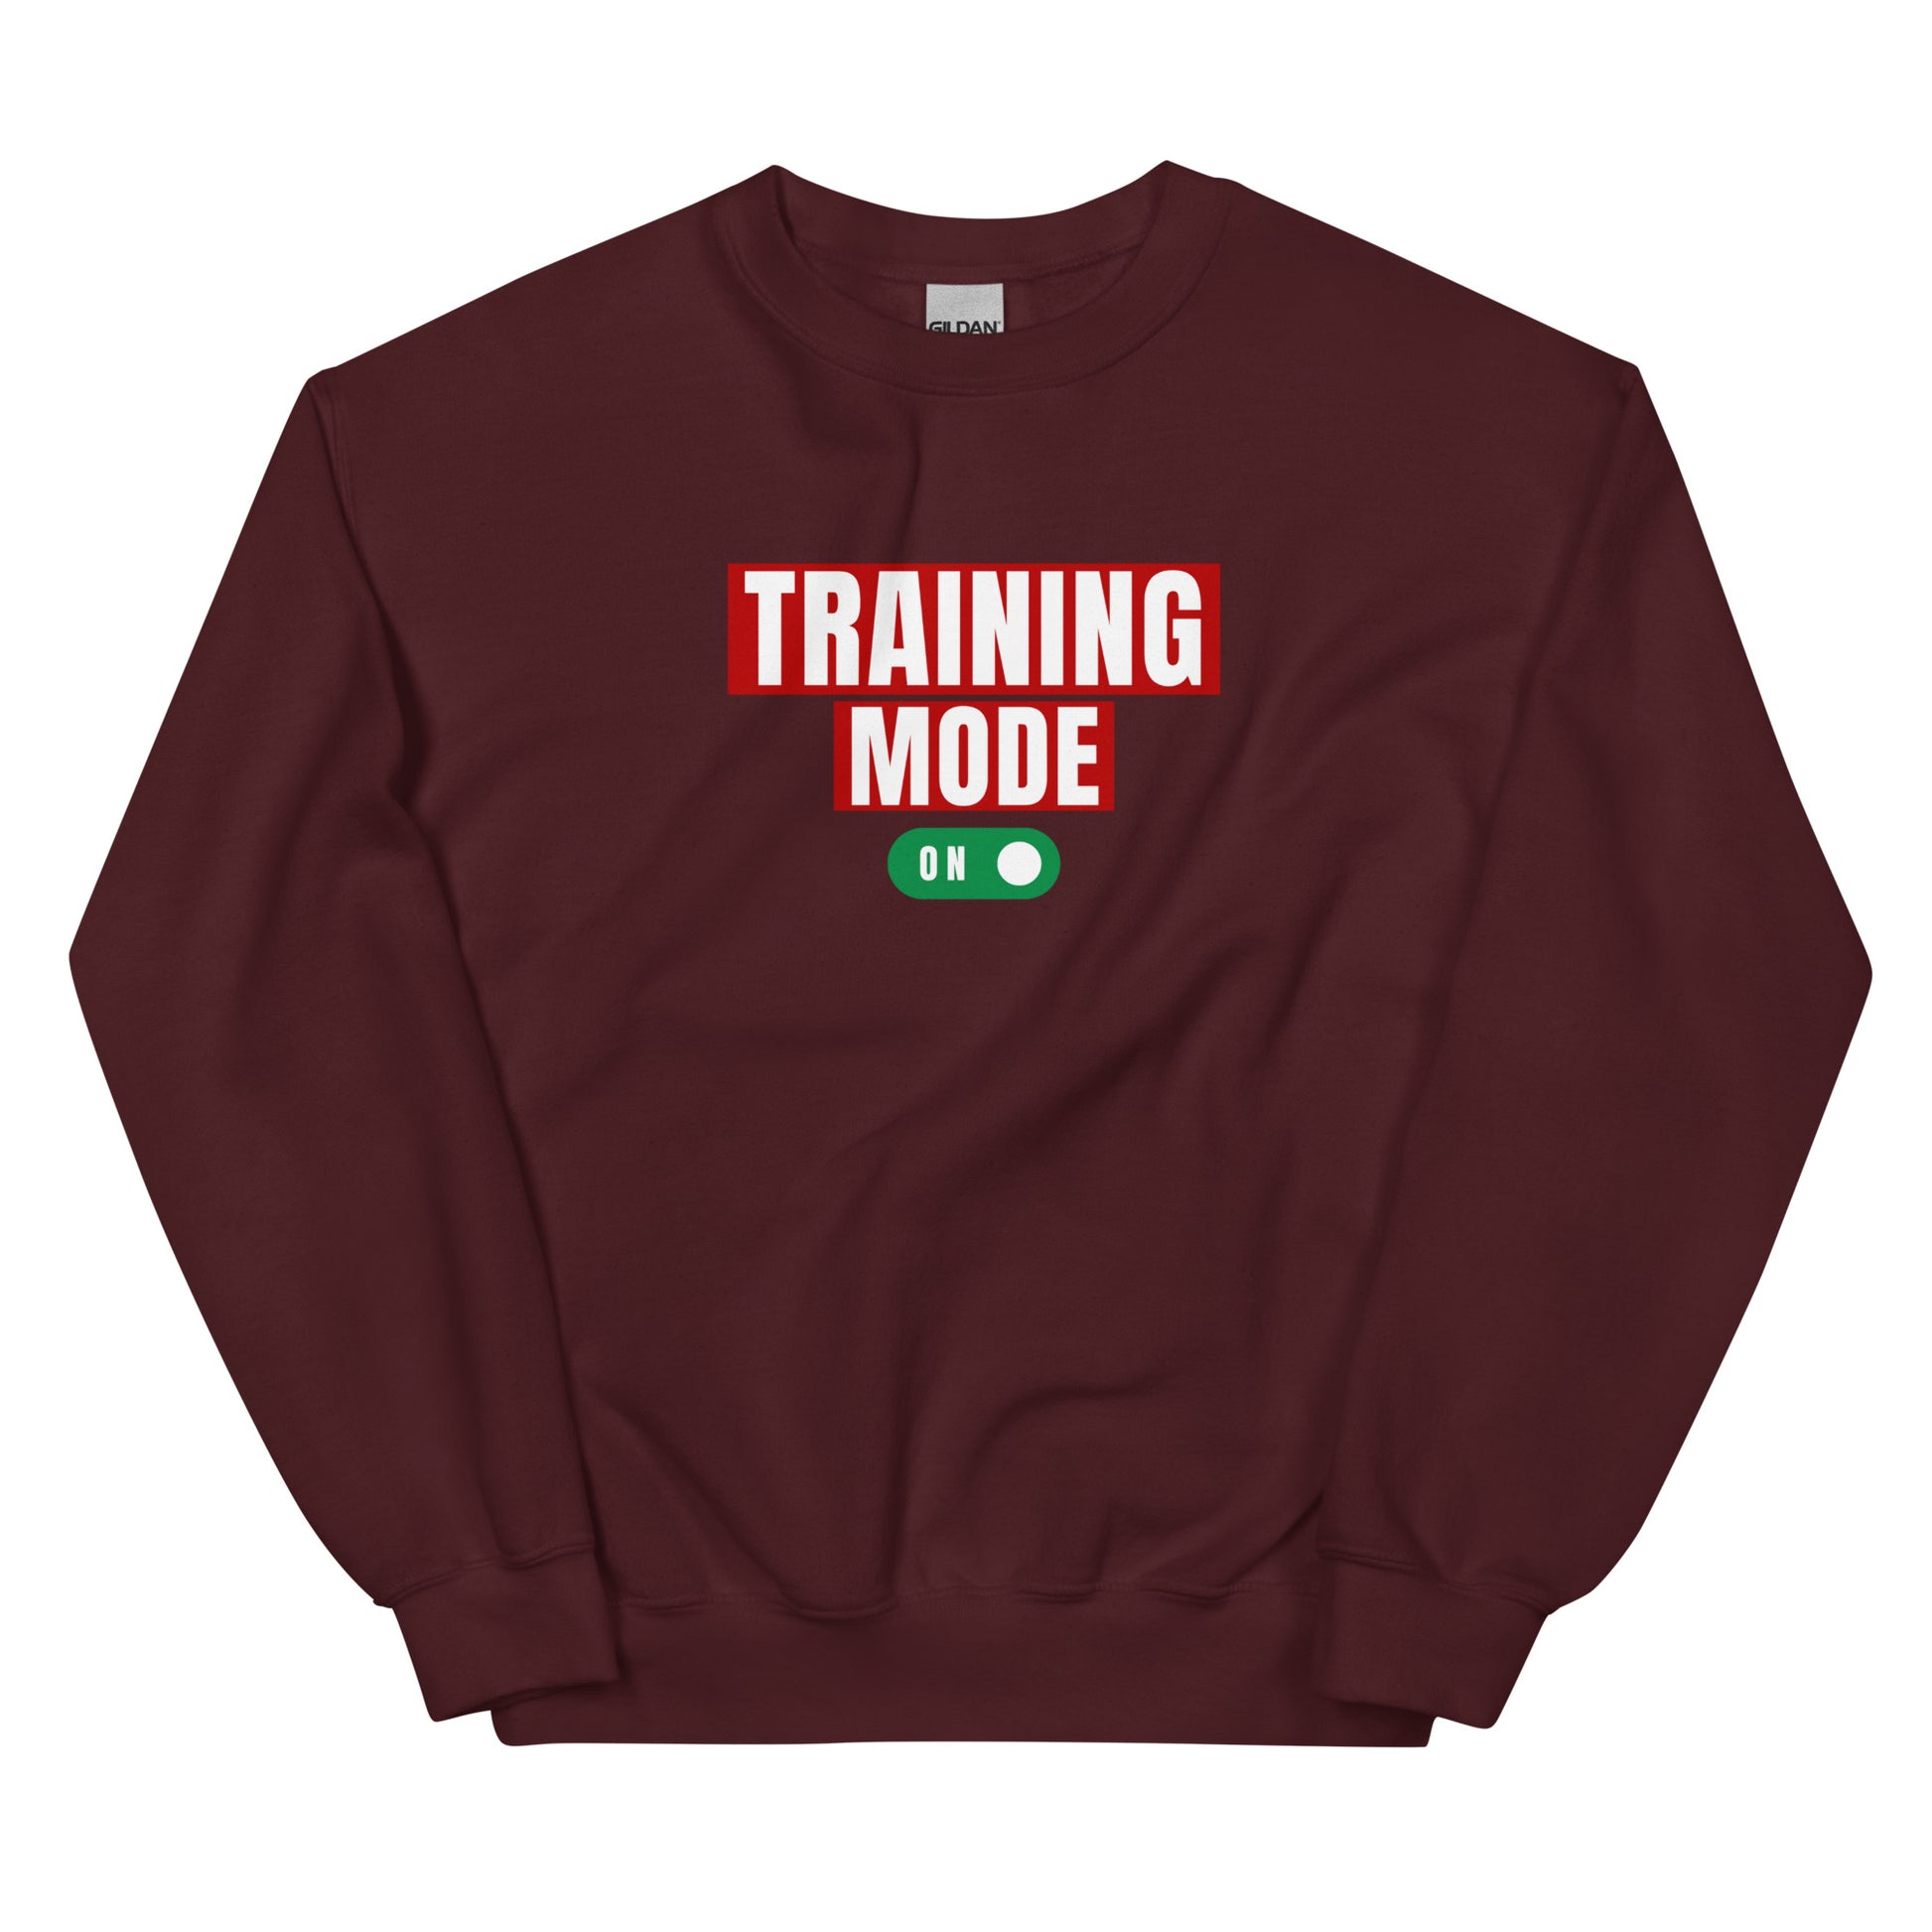 Training mode on German Shepherd dog lovers and owners sweatshirt, red color - GSD Colony